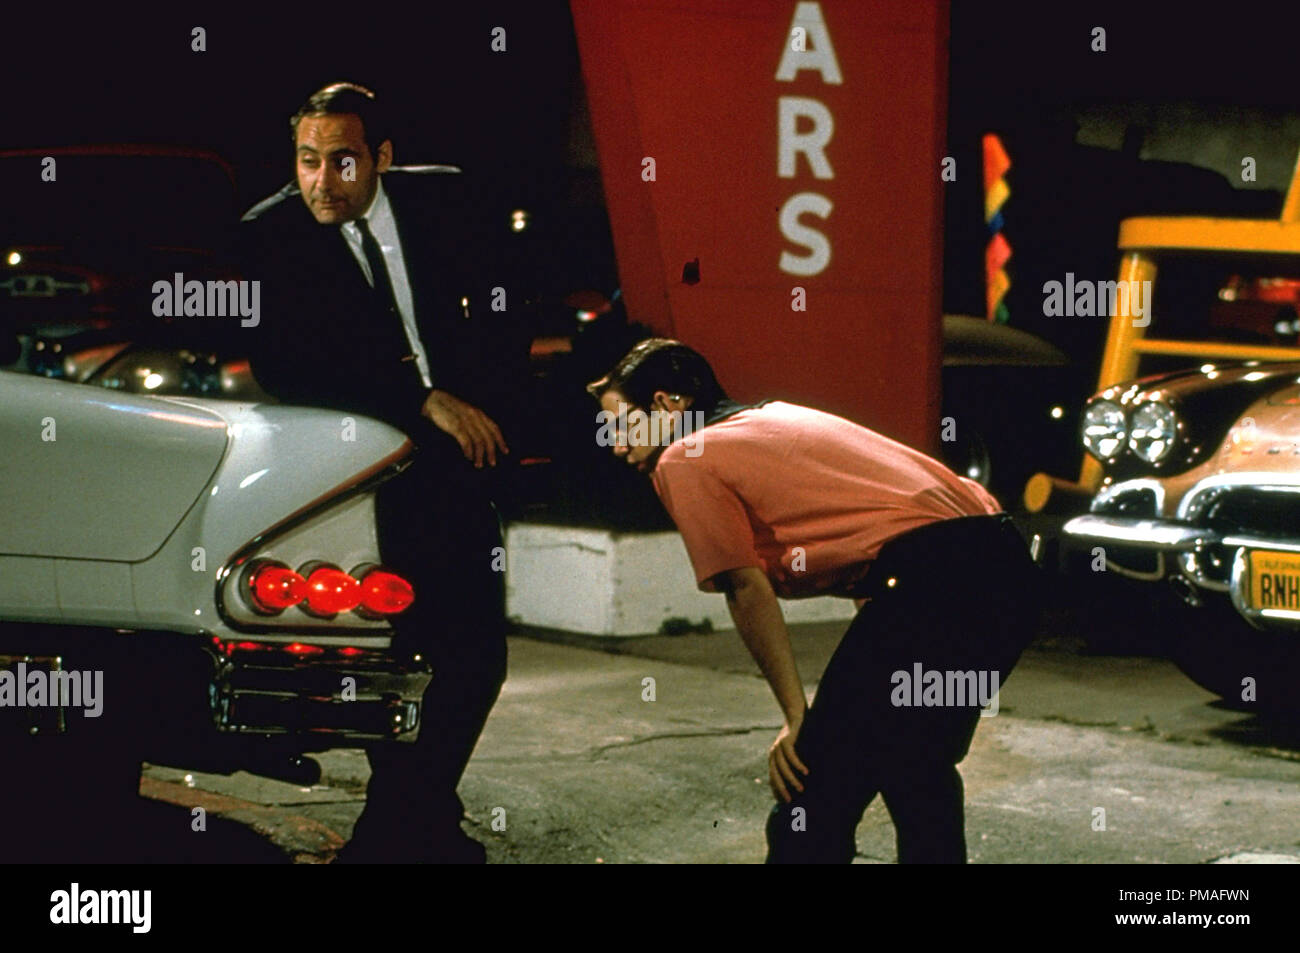 Studio released publicity film still from 'American Graffiti' Charles Martin Smith,  1973 Universal Pictures   File Reference # 32633 825THA Stock Photo